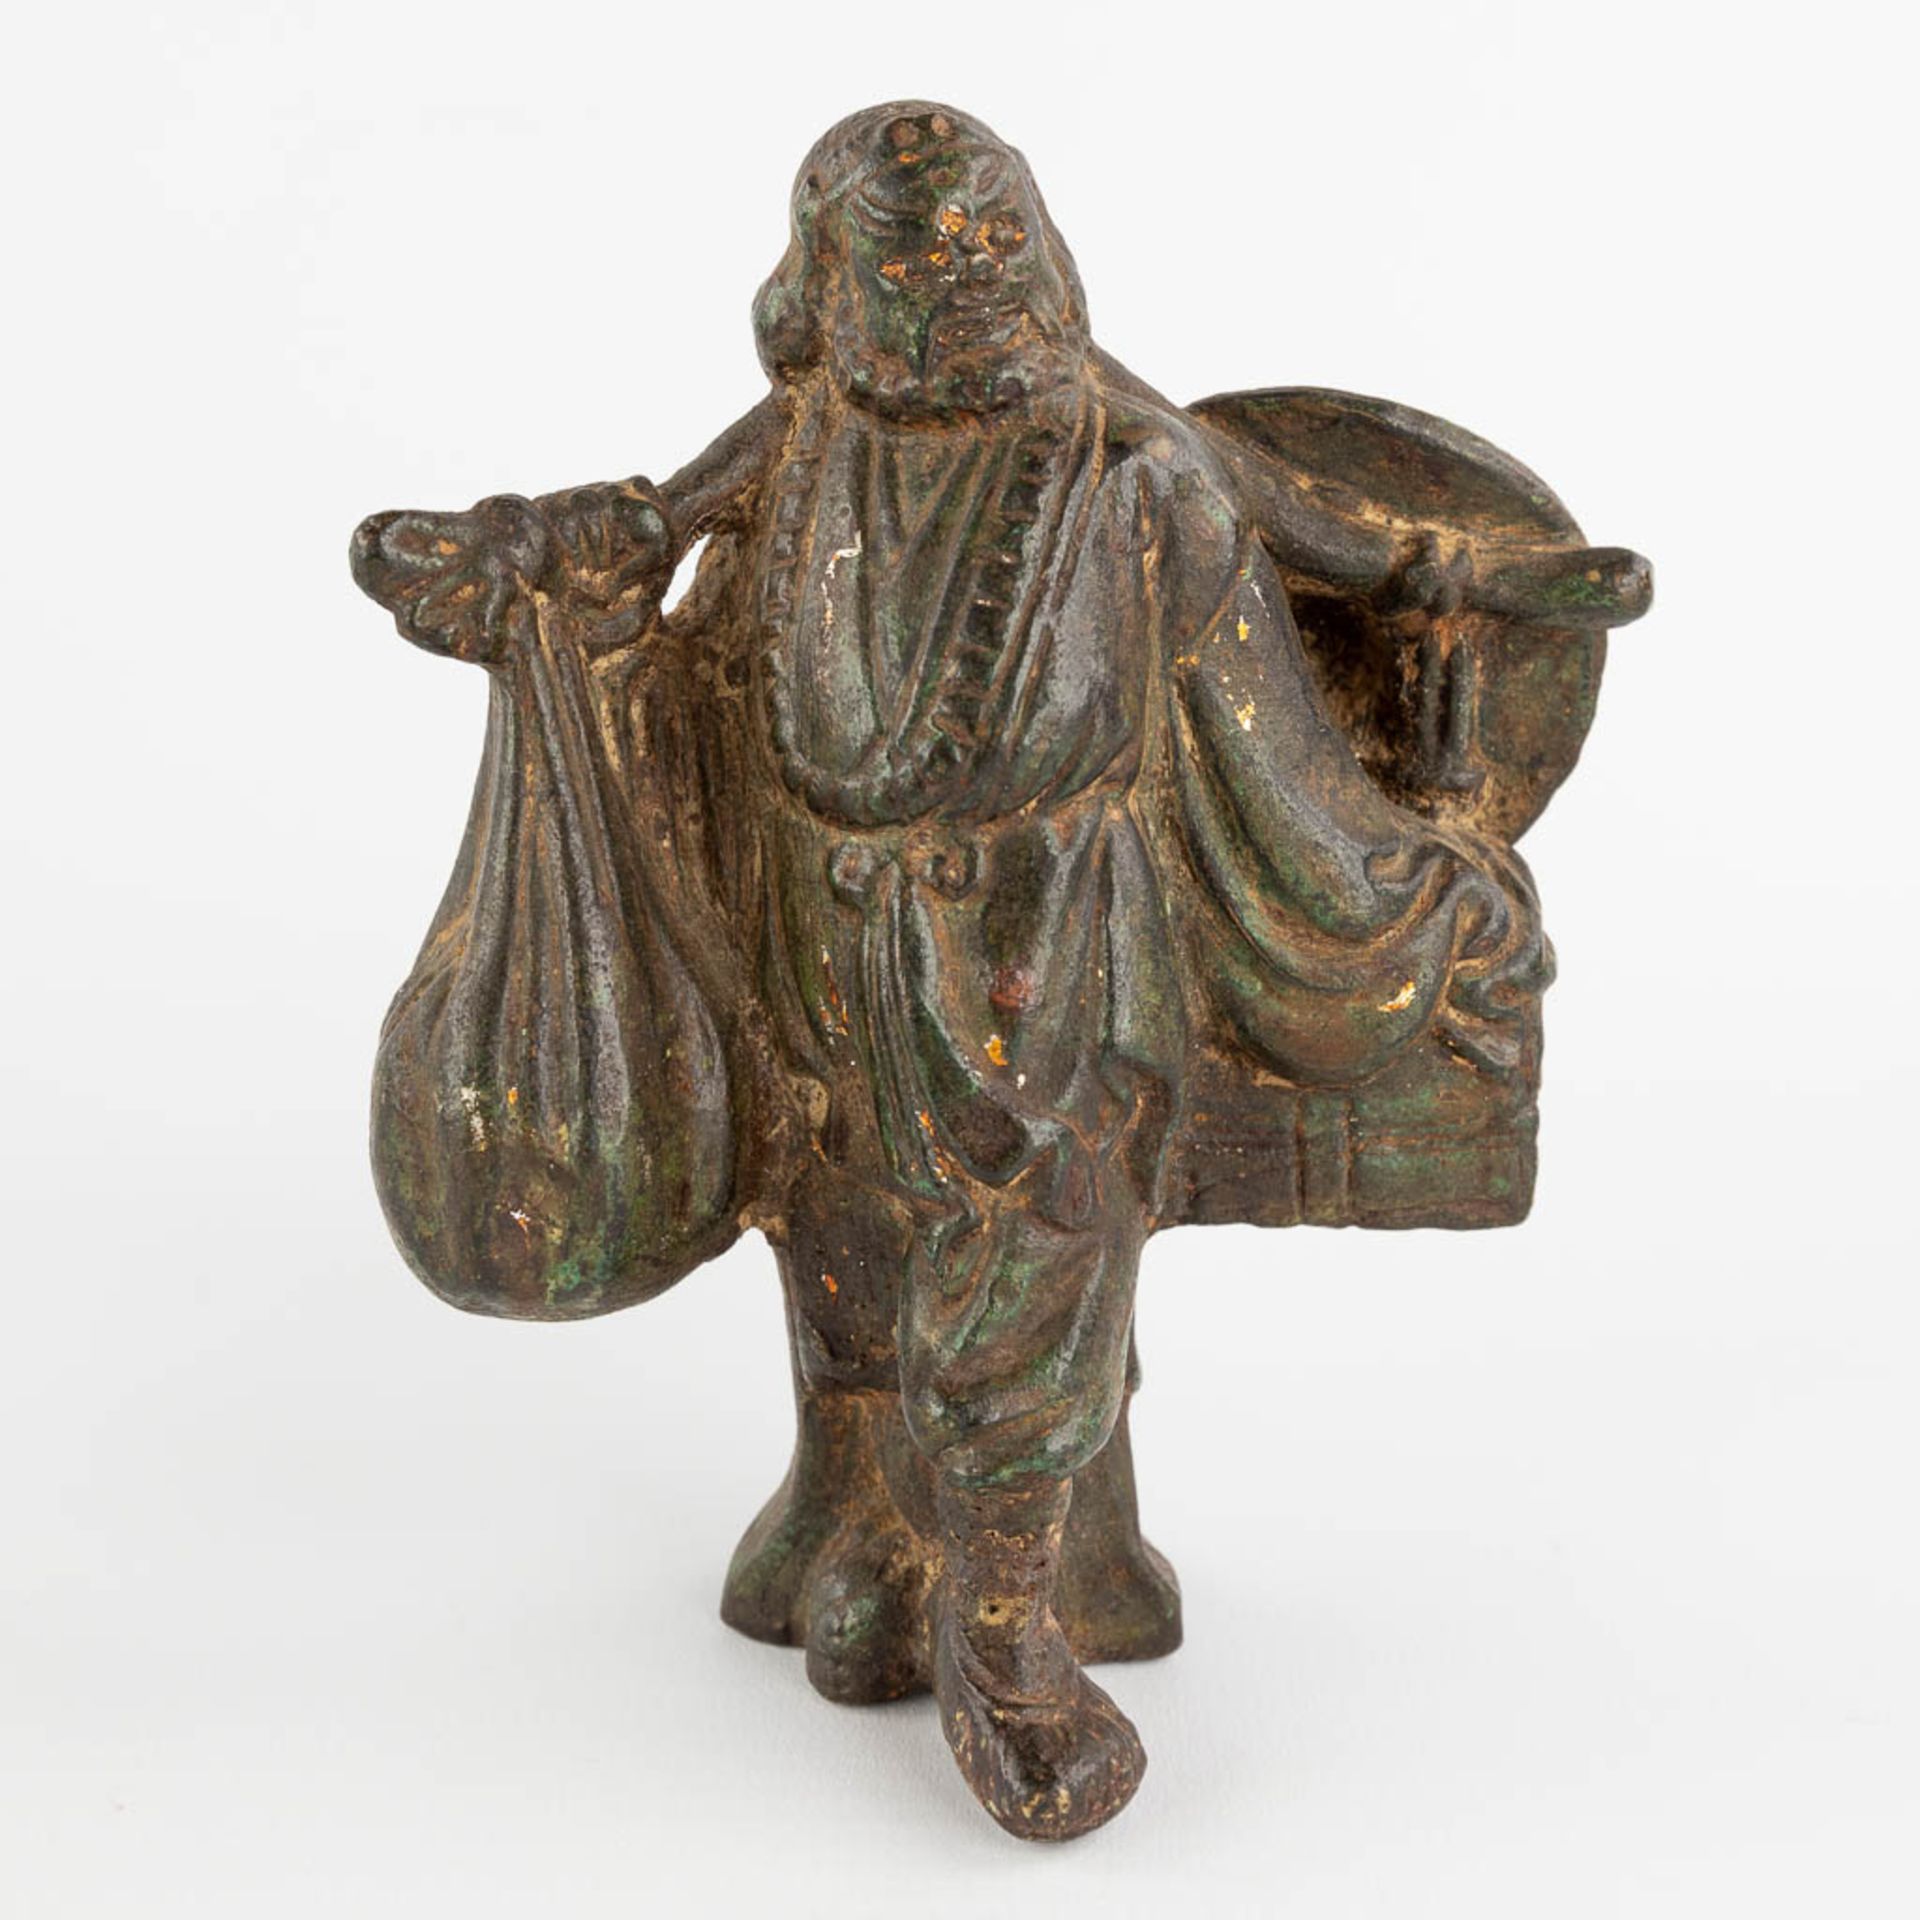 4 Chinese figurines, made of bronze. (L:7 x W:18 x H:18 cm) - Image 10 of 12